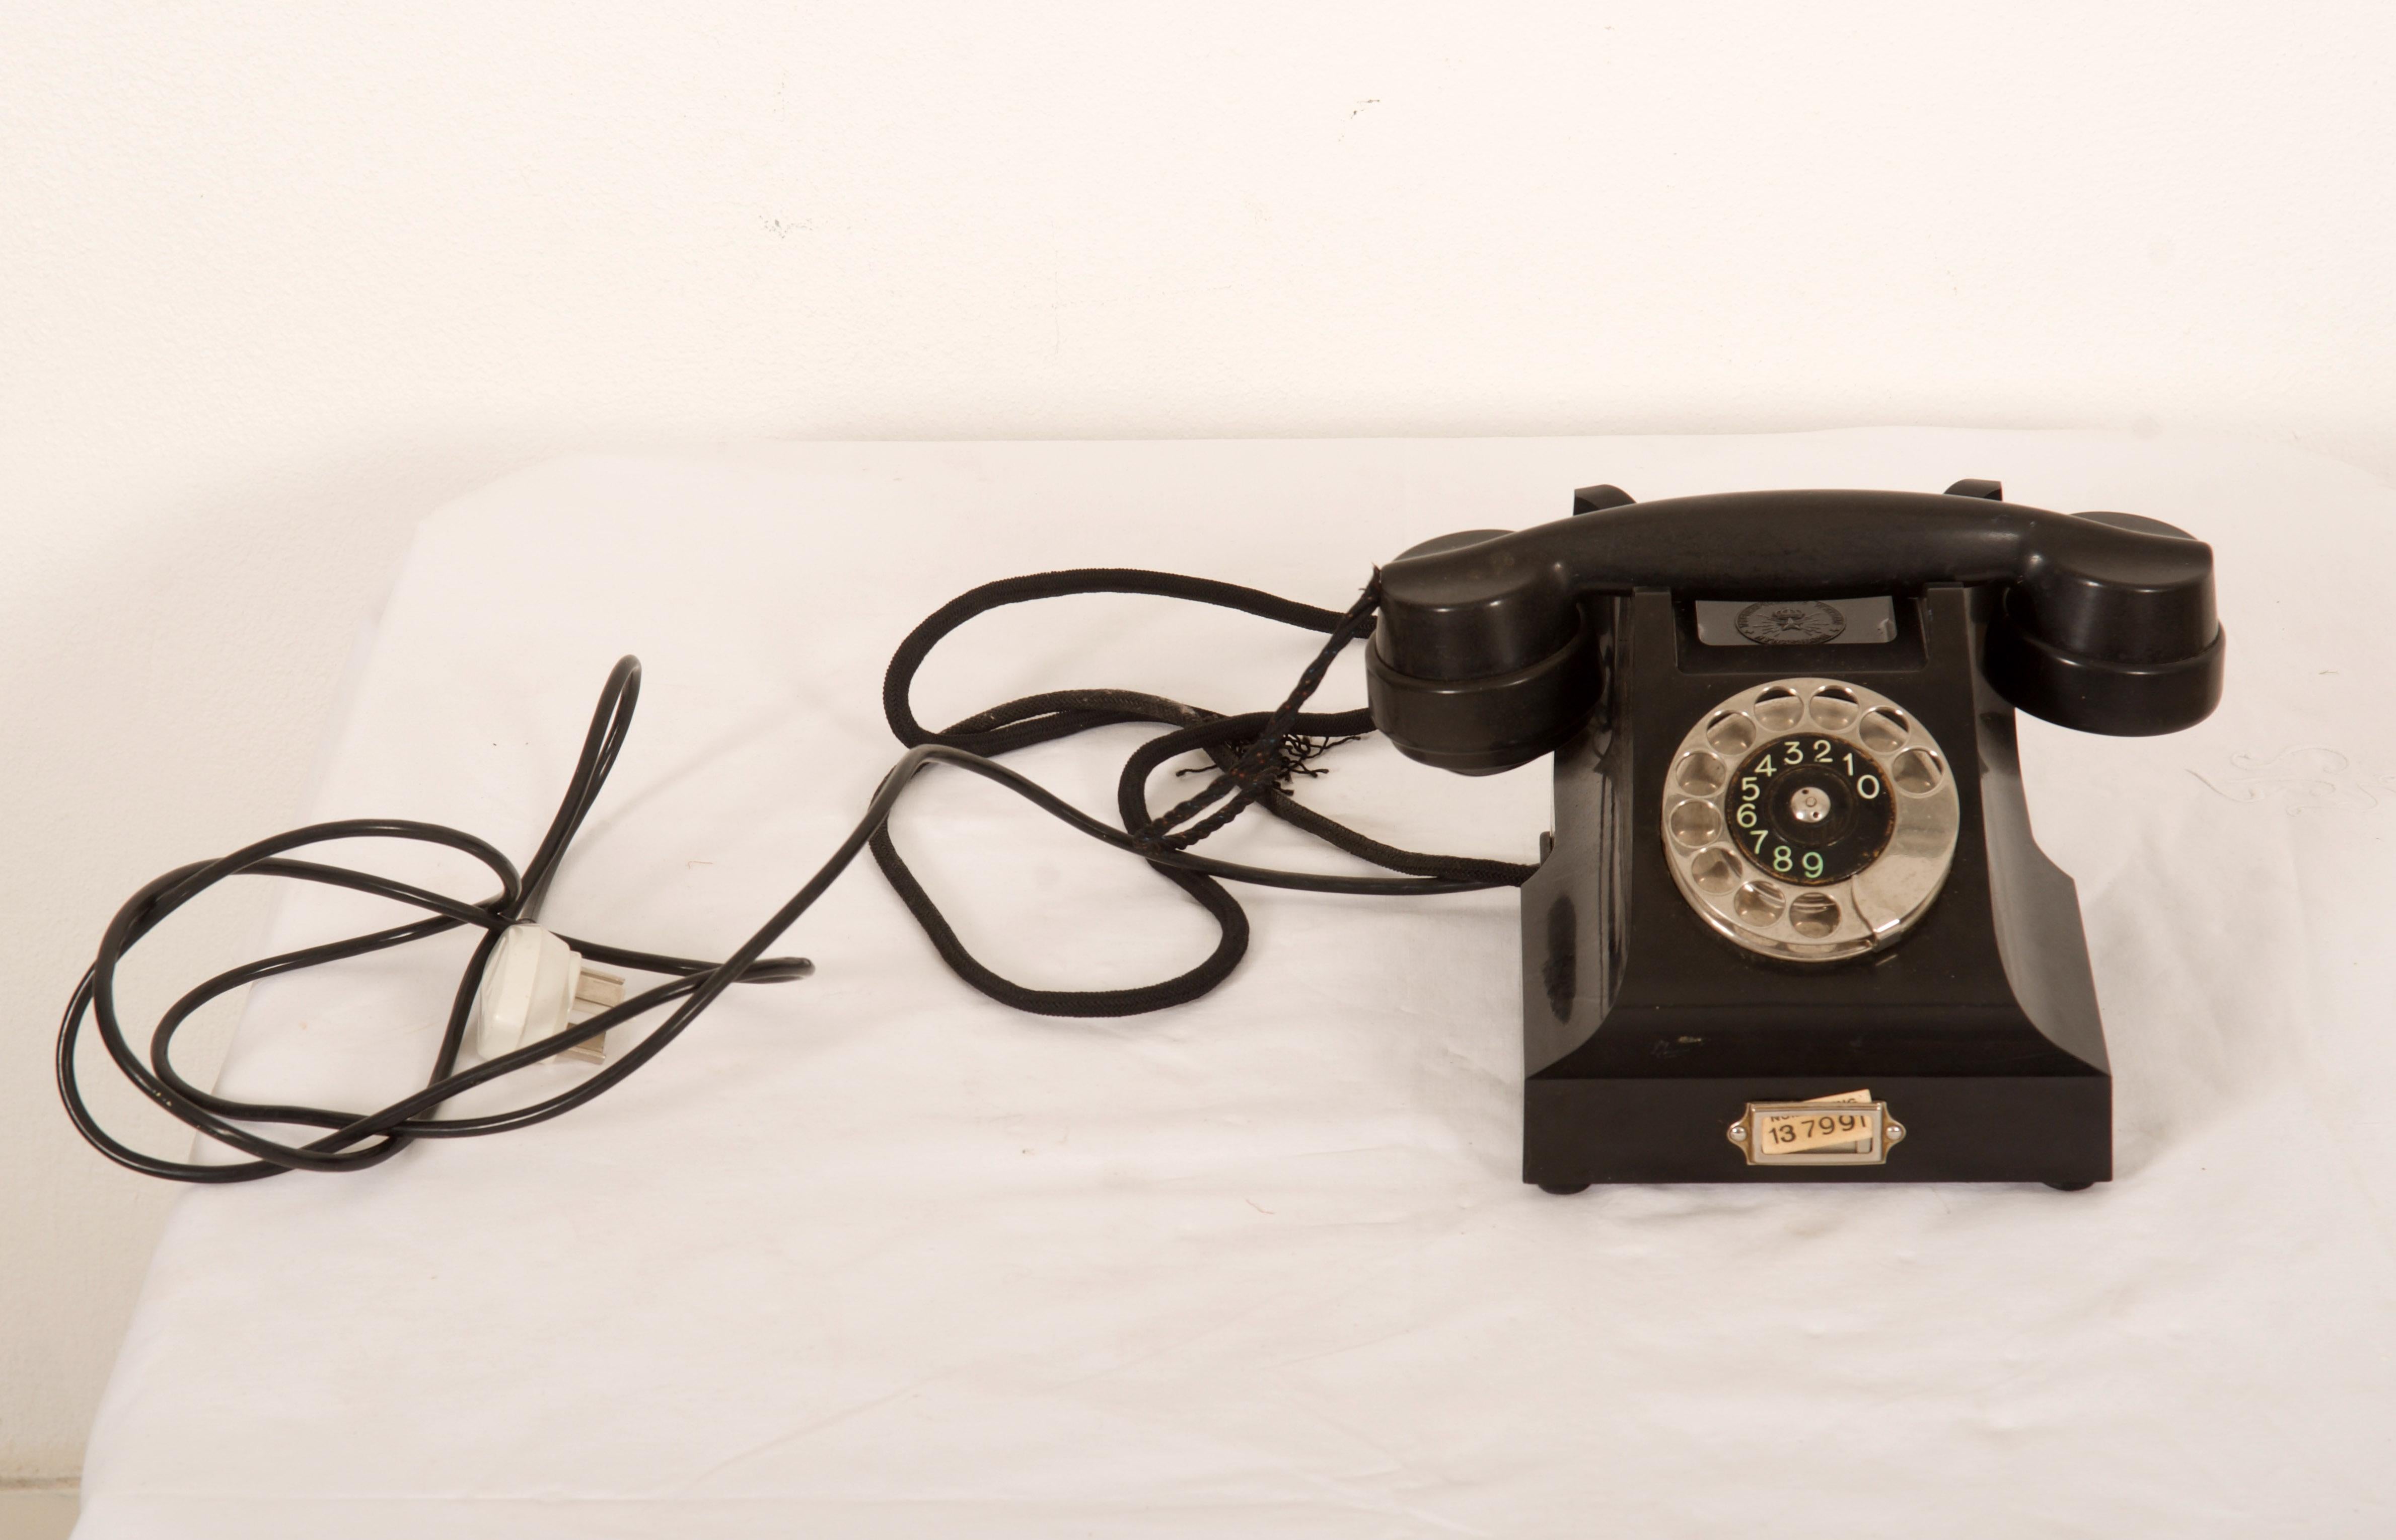 Bakelite table phone by LM Eriksson from the early 1960s.
     